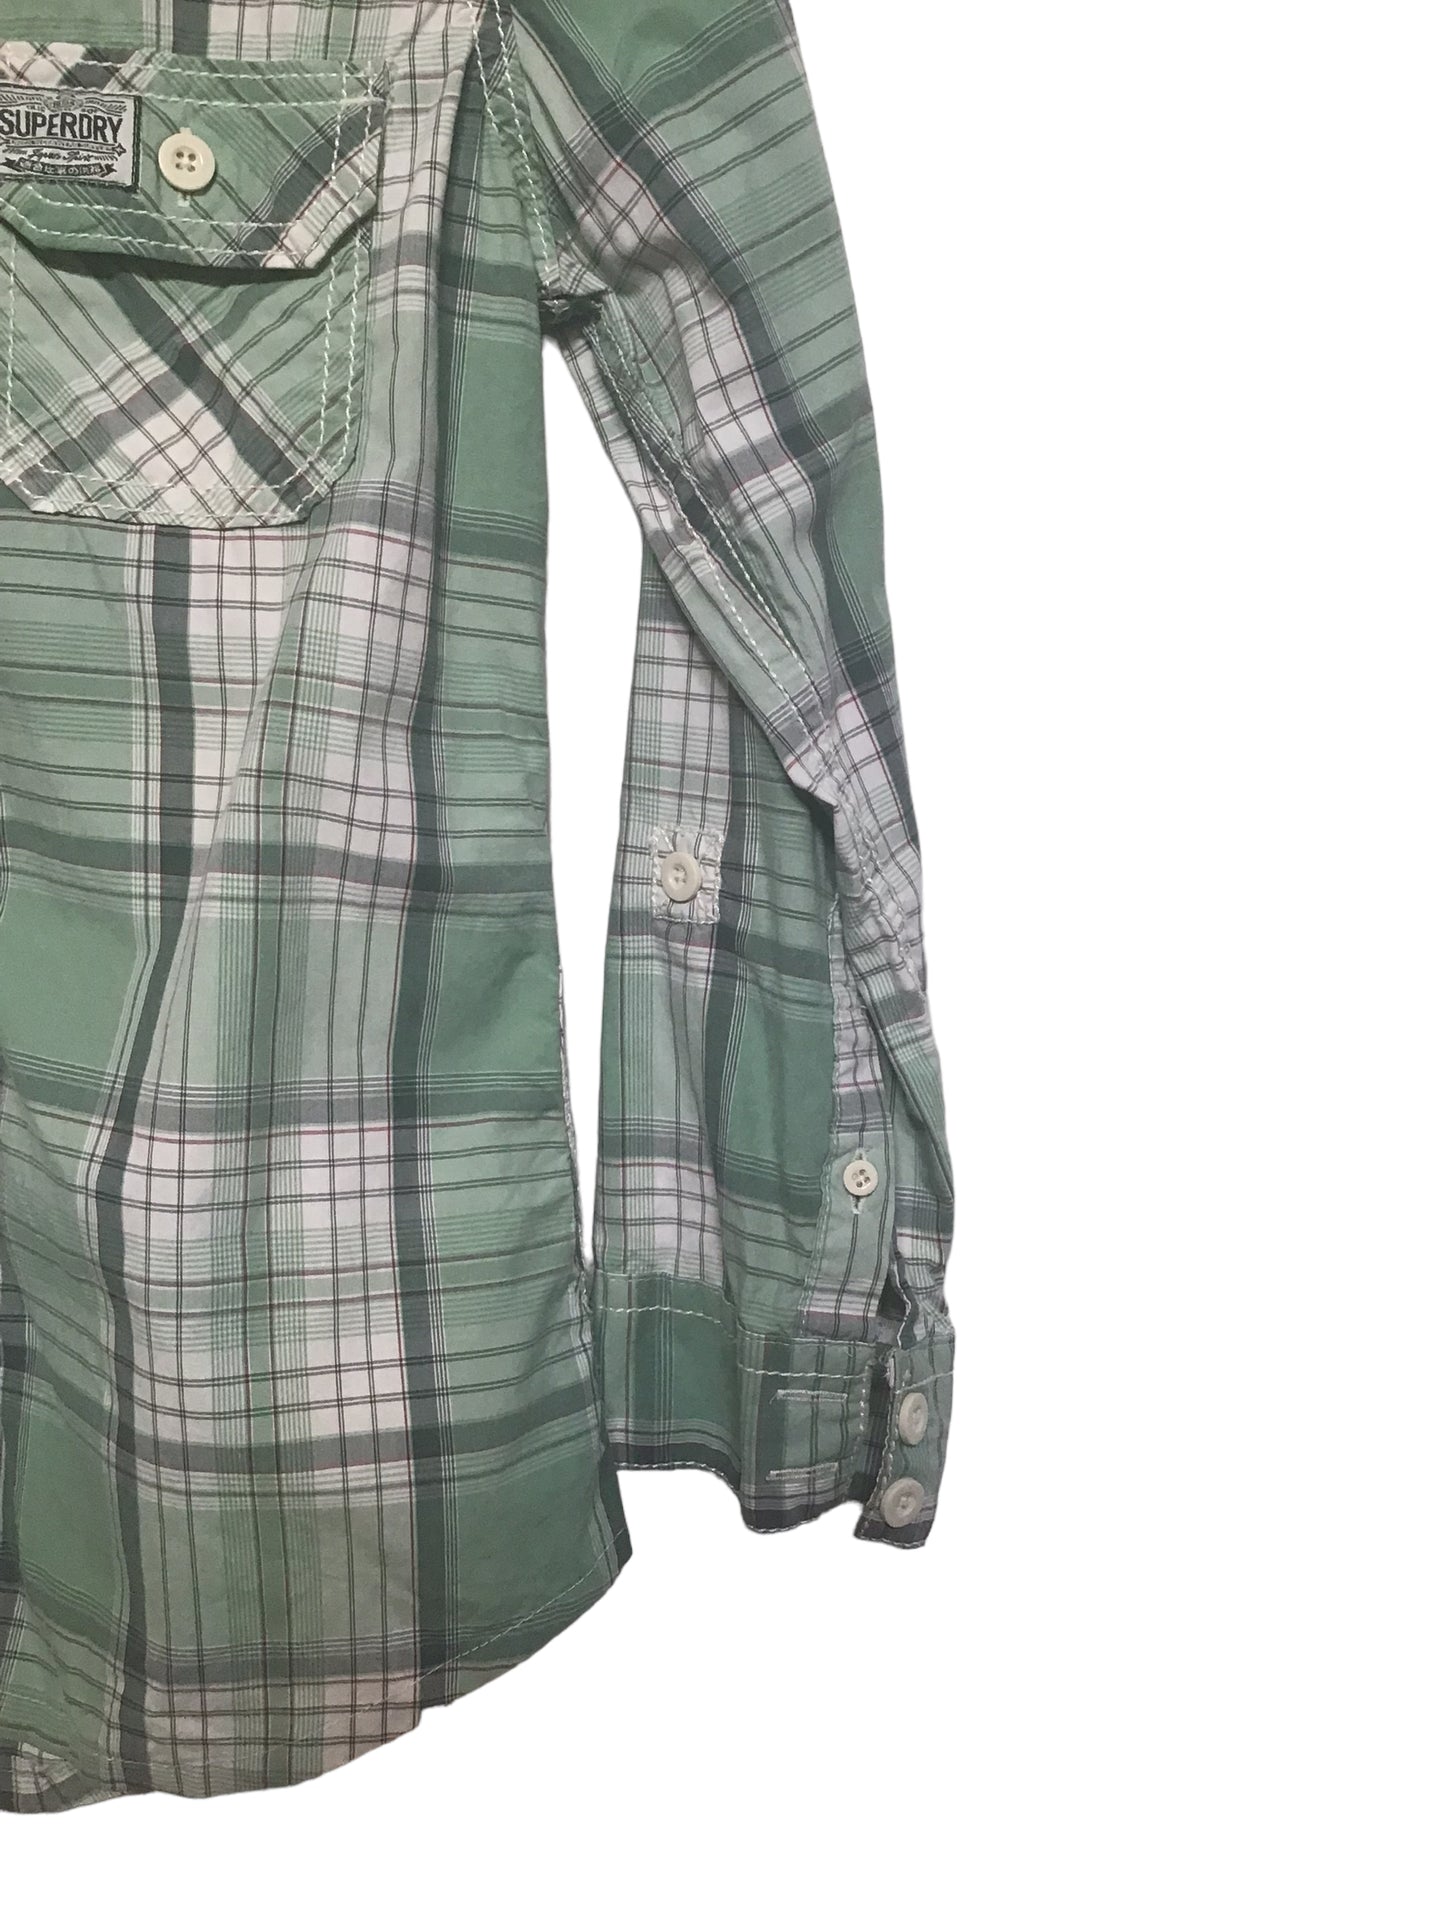 Superdry Shirt (Size S)